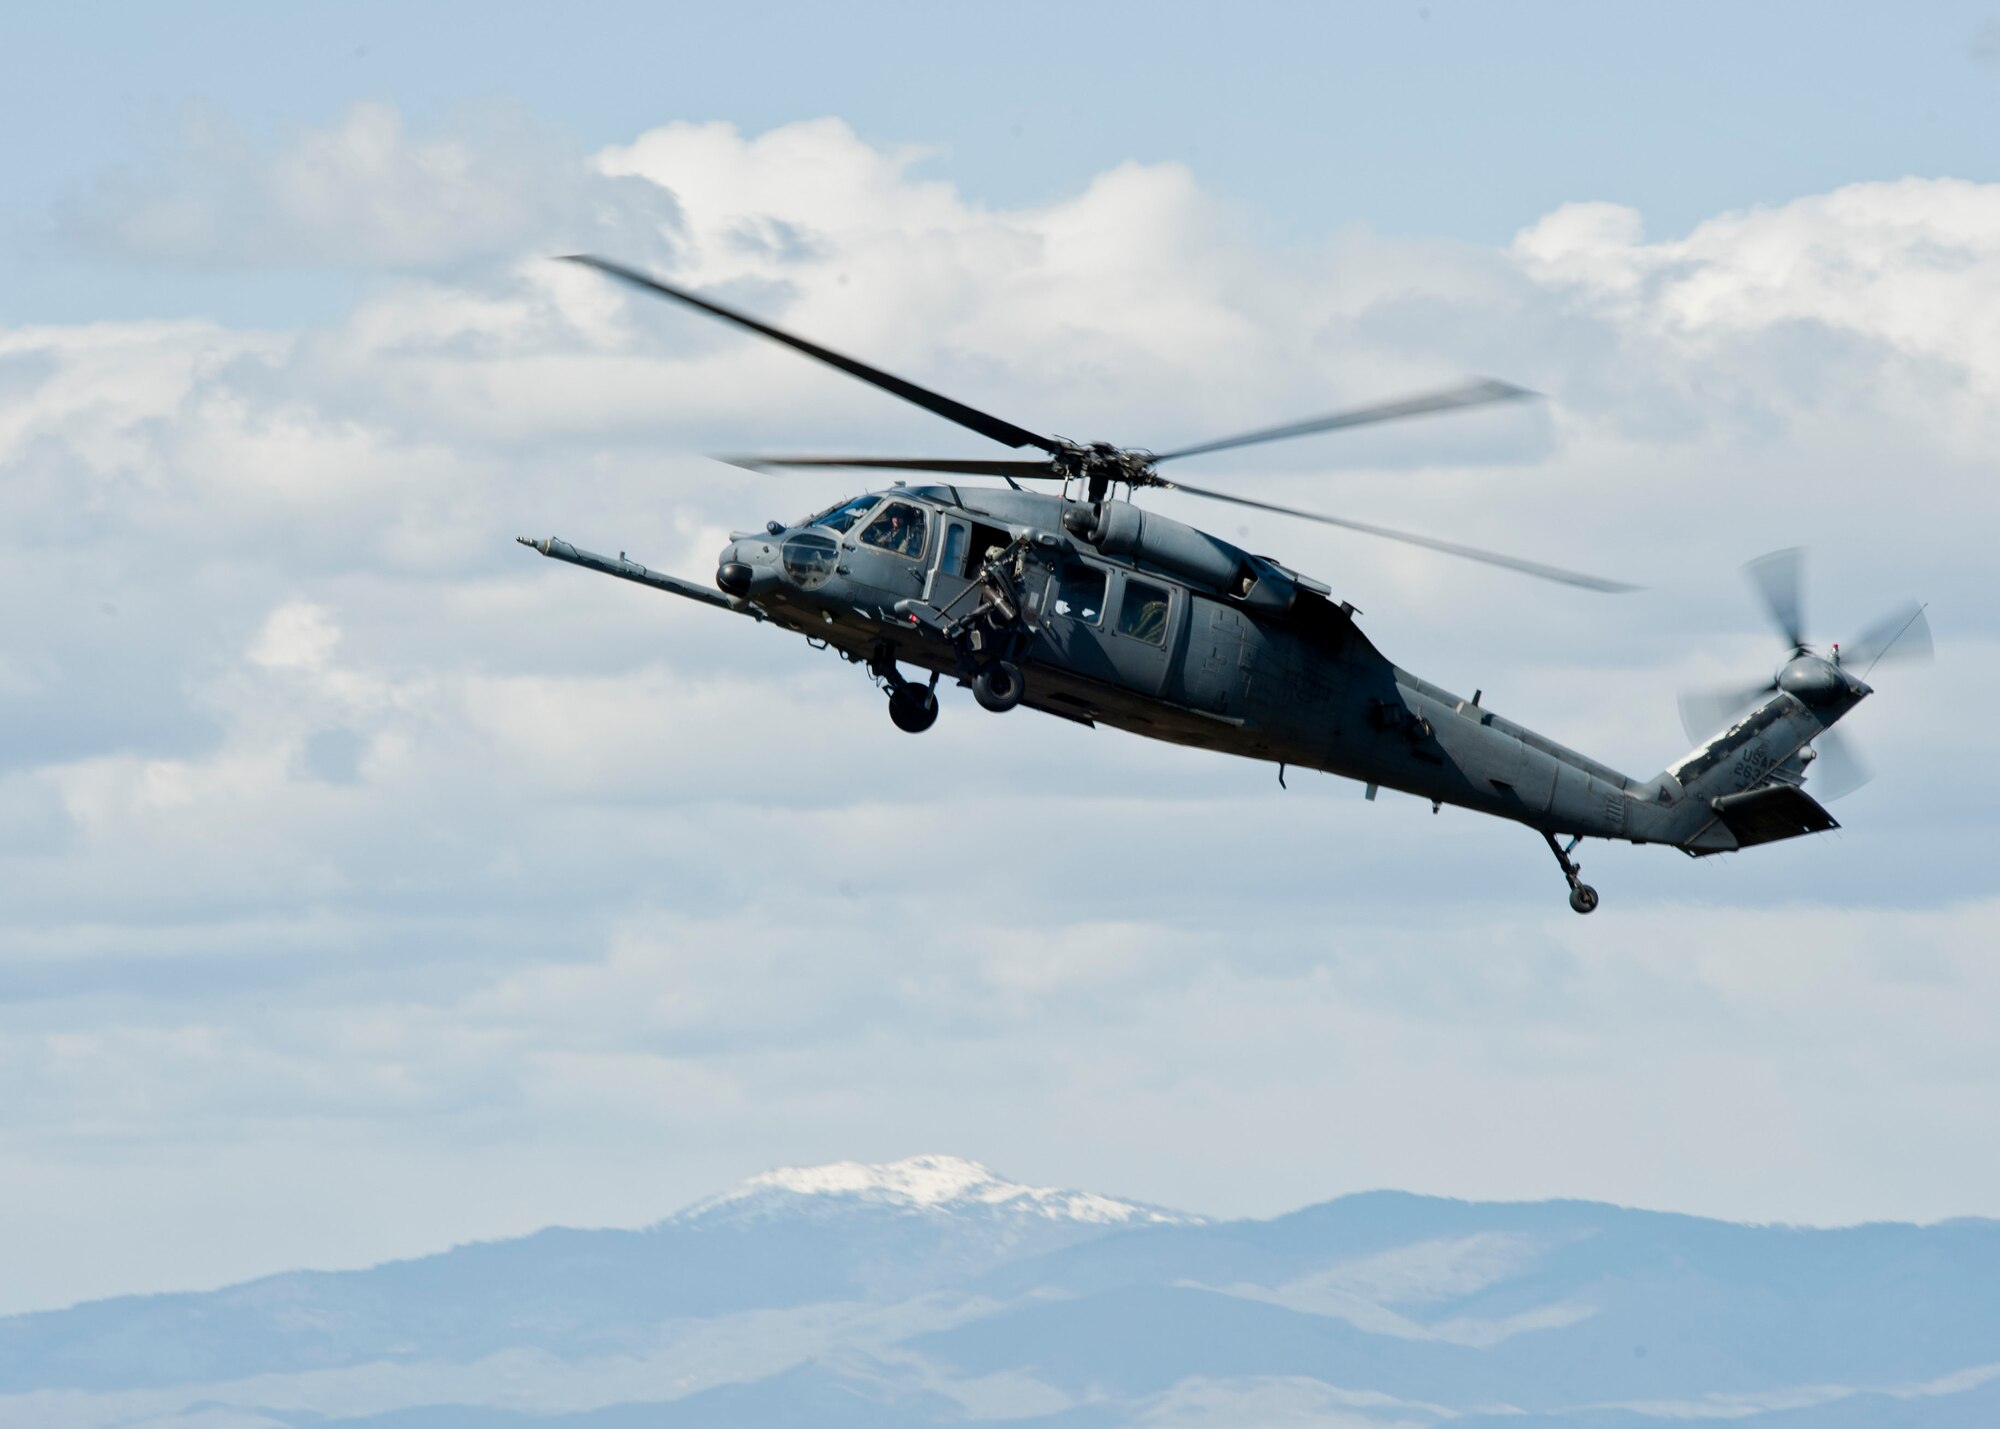 A U.S. Air Force HH-60 Pave Hawk assigned to Nellis Air Force Base, Nev. prepares to land during the U.S. Air Force Weapons School terminal employment phase portion of pilot training April 28, 2014, at Orchard Combat Training Center, Idaho. The TE mission objective is to demonstrate and instruct HH-60 Pave Hawk weapons employment and landing zone options to weapons school students by maximizing weapons proficiency and quickly recover survivors. (U.S. Air Force photo by Senior Airman Jason Couillard)